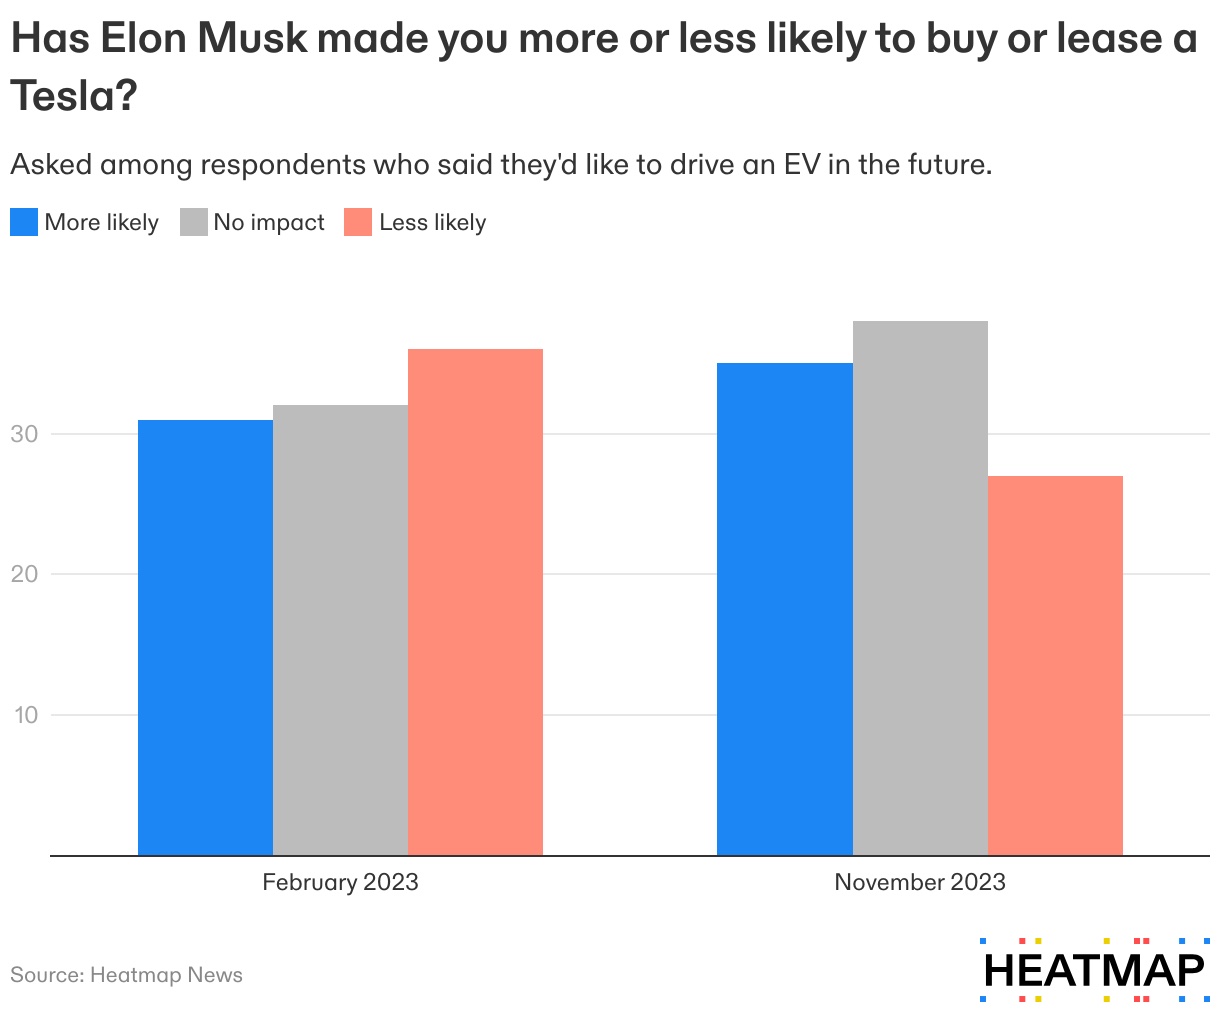 has-elon-musk-made-you-more-or-less-likely-to-buy-or-lease-a-tesla-